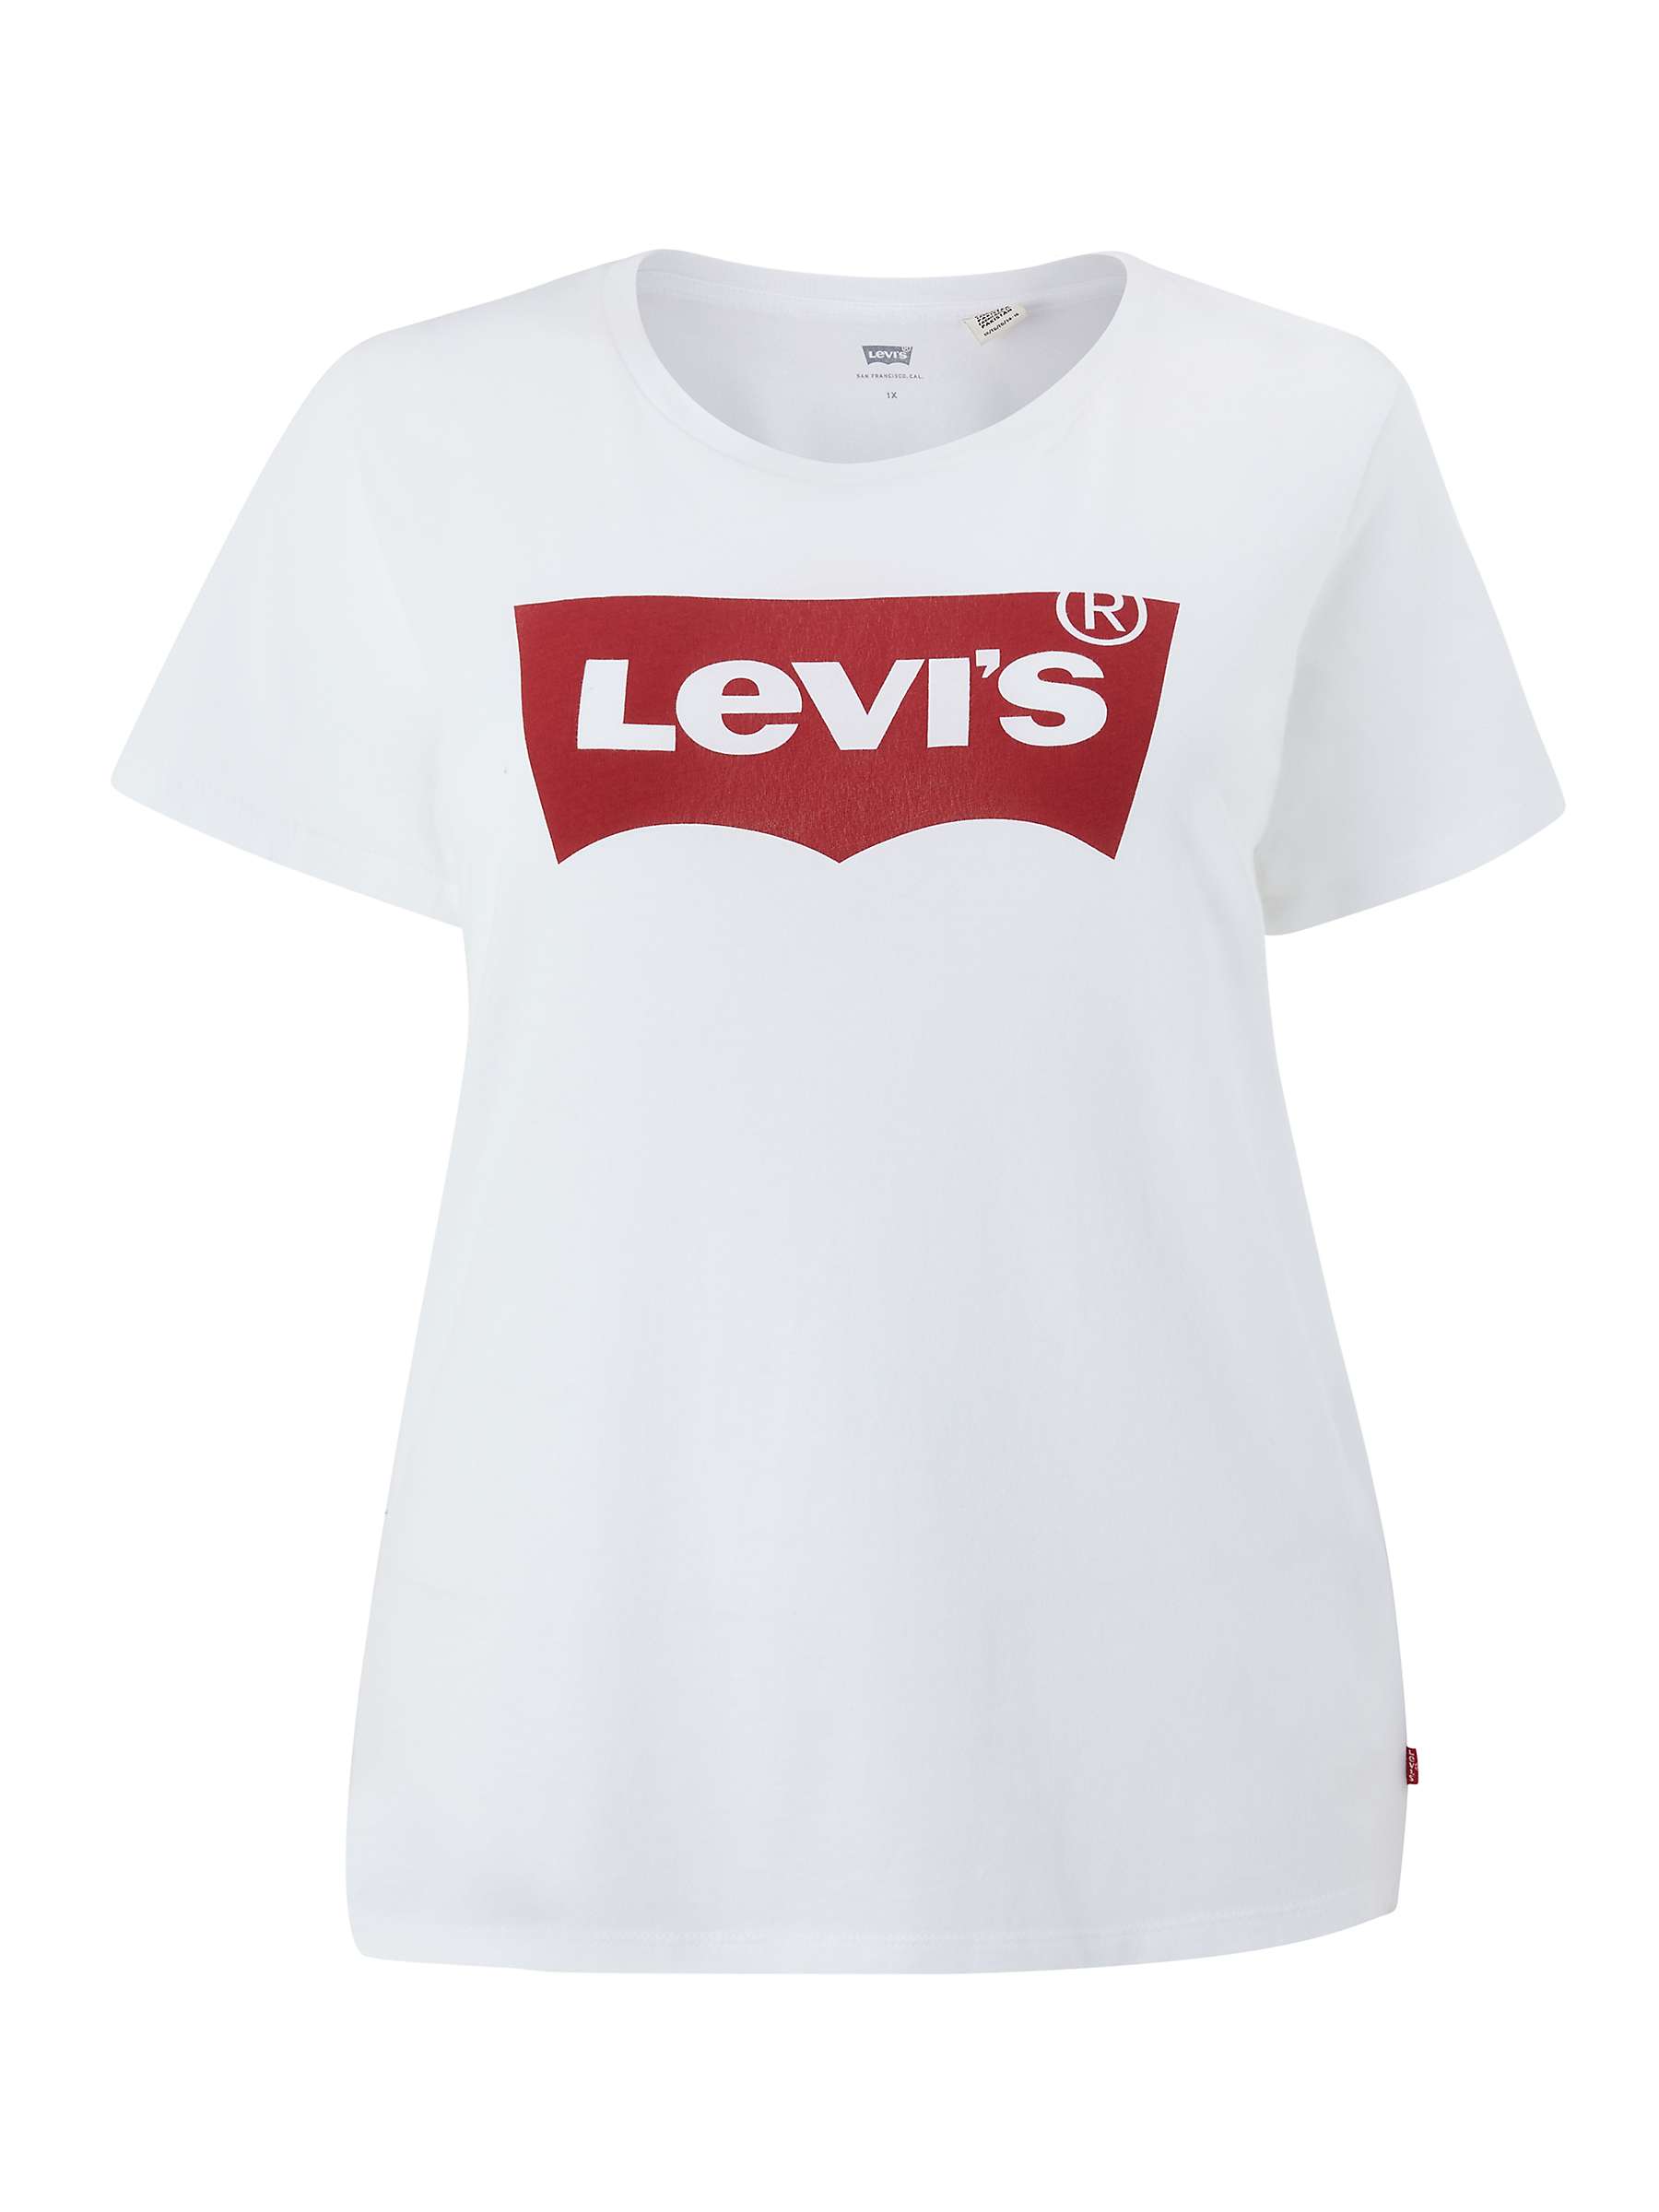 Buy Levi's Plus The Perfect T-Shirt, Batwing White Online at johnlewis.com